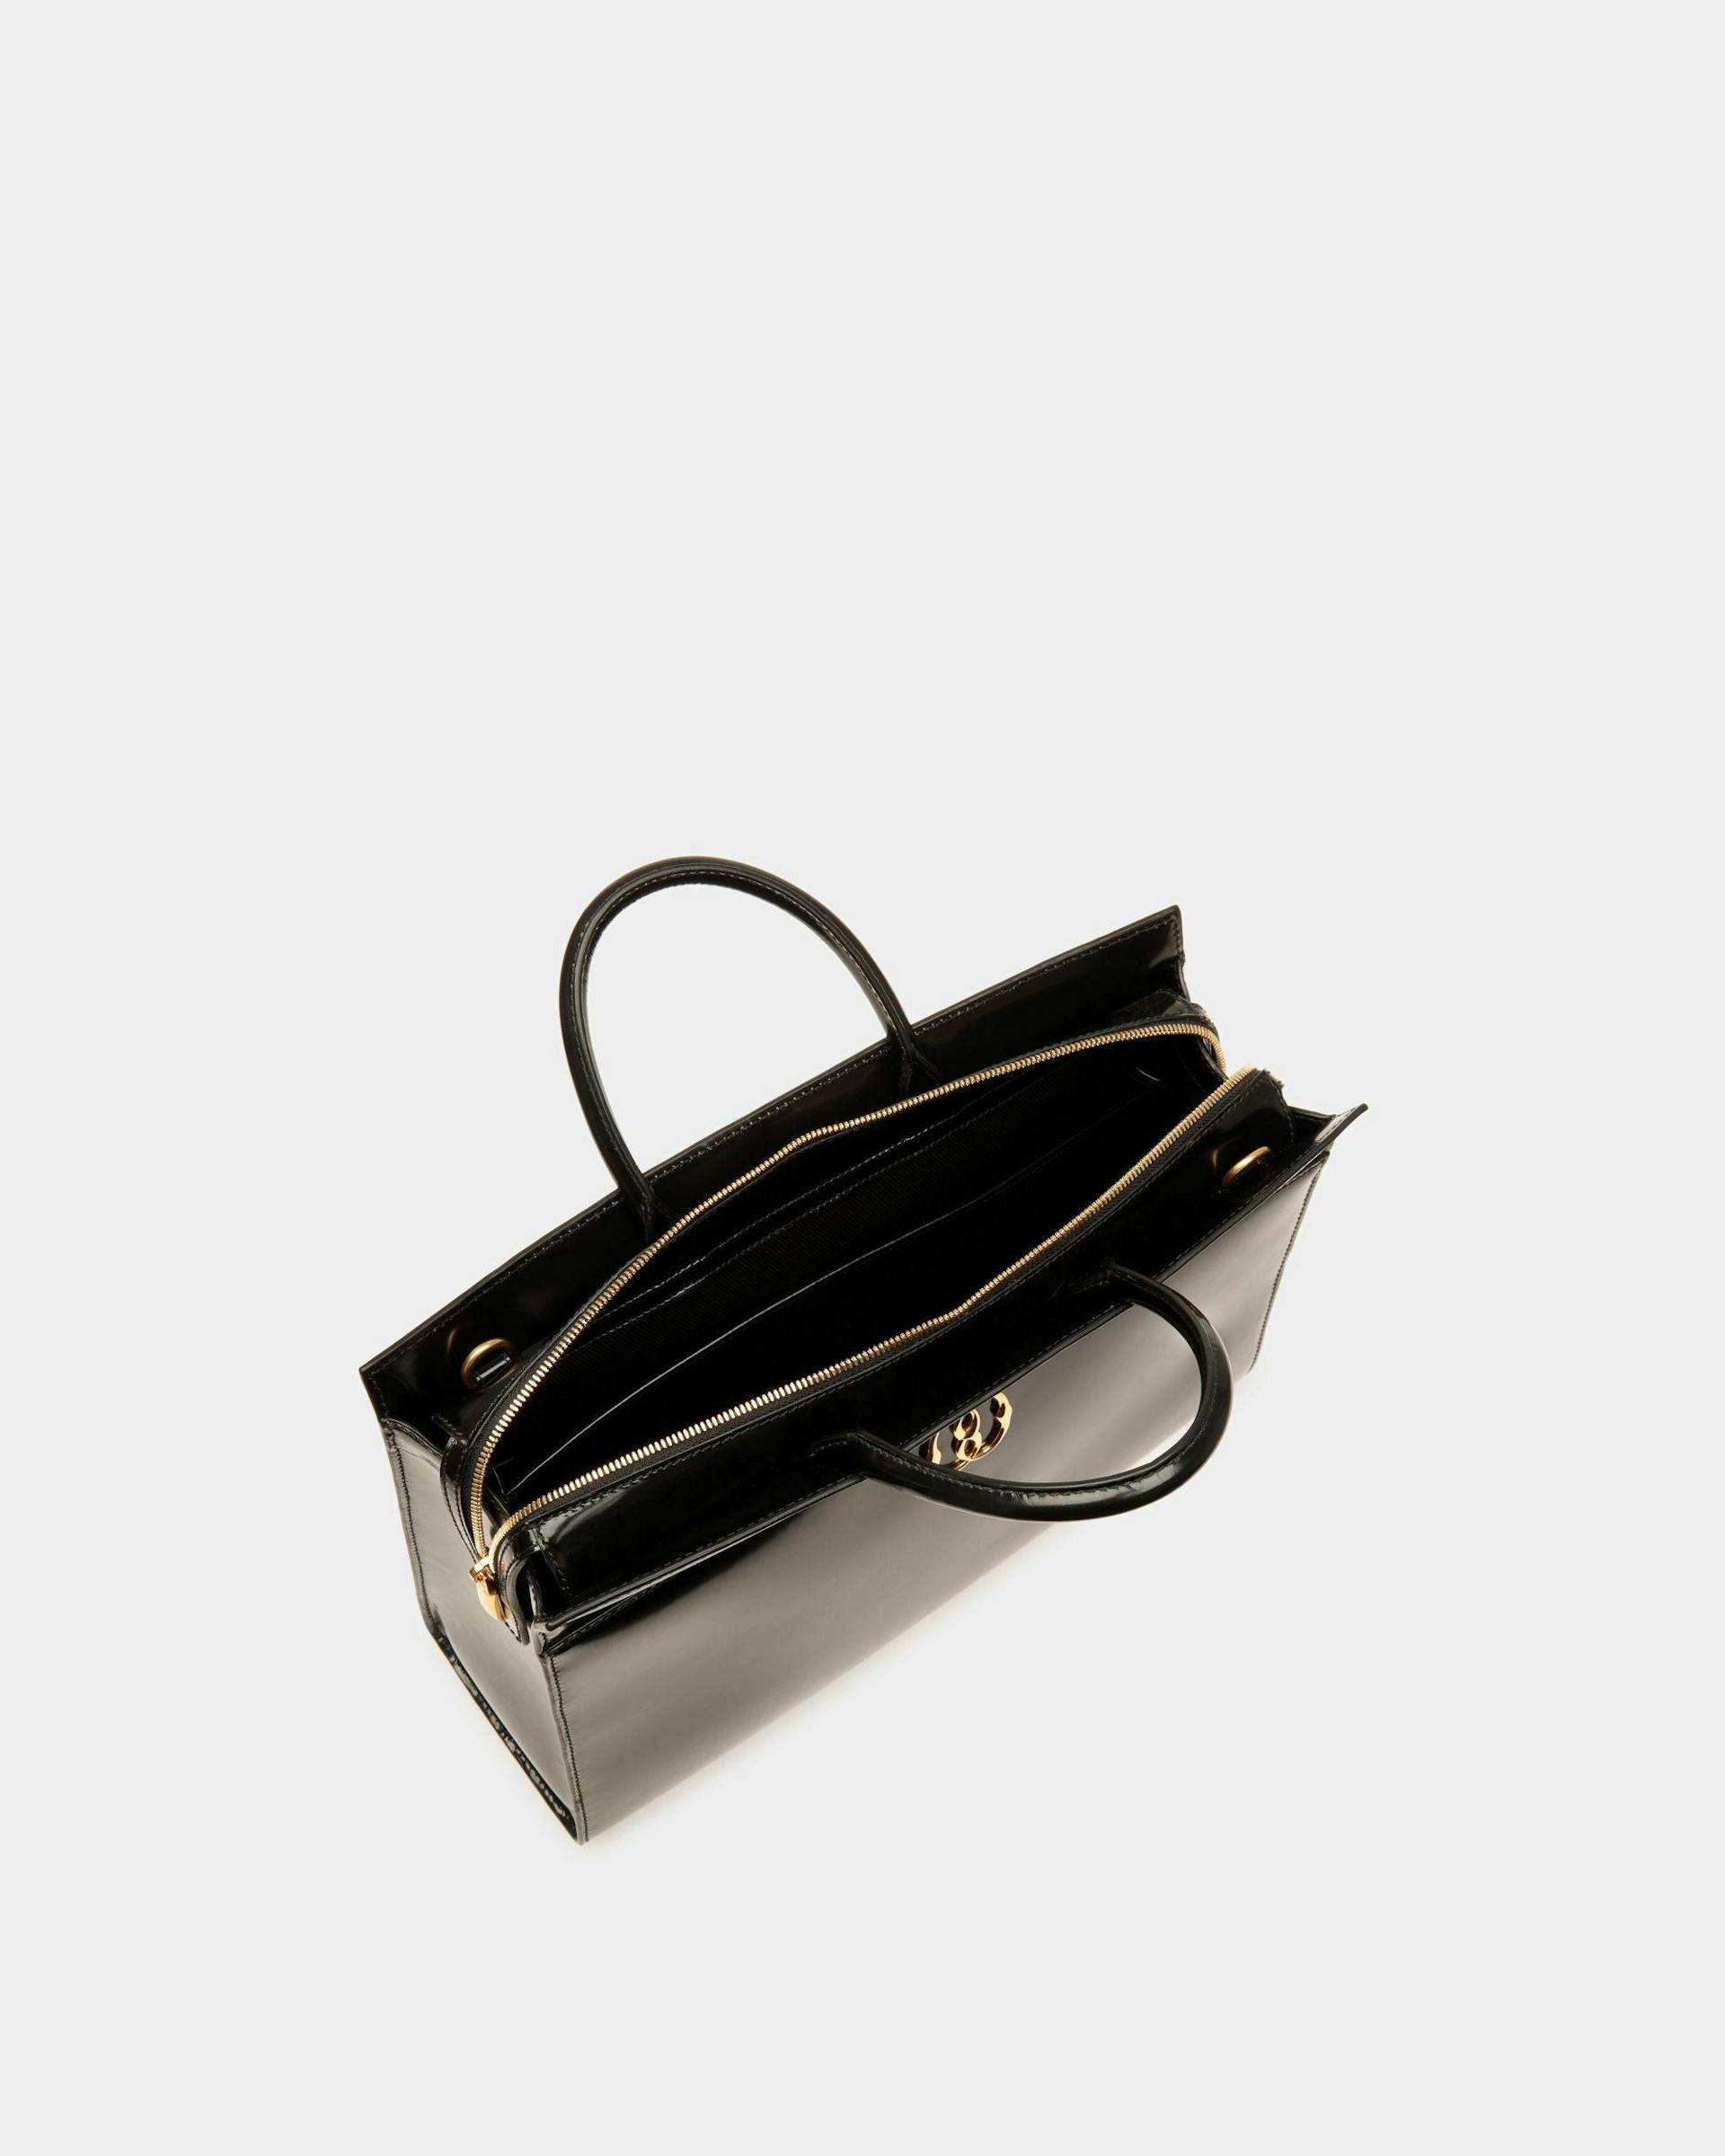 Women's Emblem Tote Bag In Black Patent Leather | Bally | Still Life Open / Inside